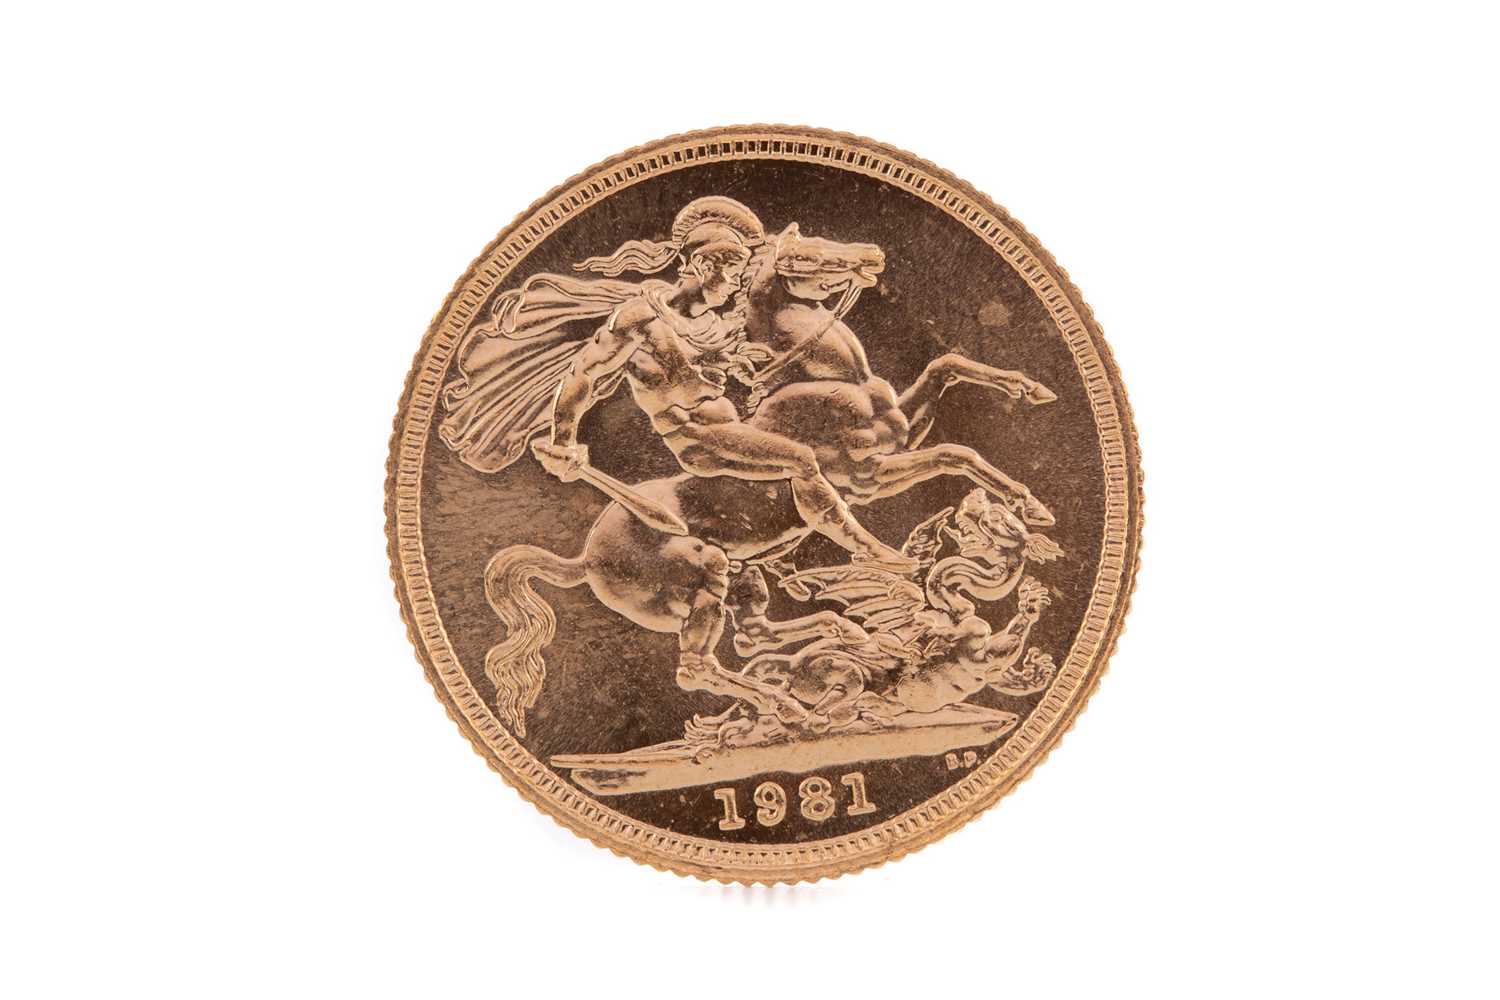 Lot 79 - AN VELIZABETH II GOLD SOVEREIGN DATED 1981